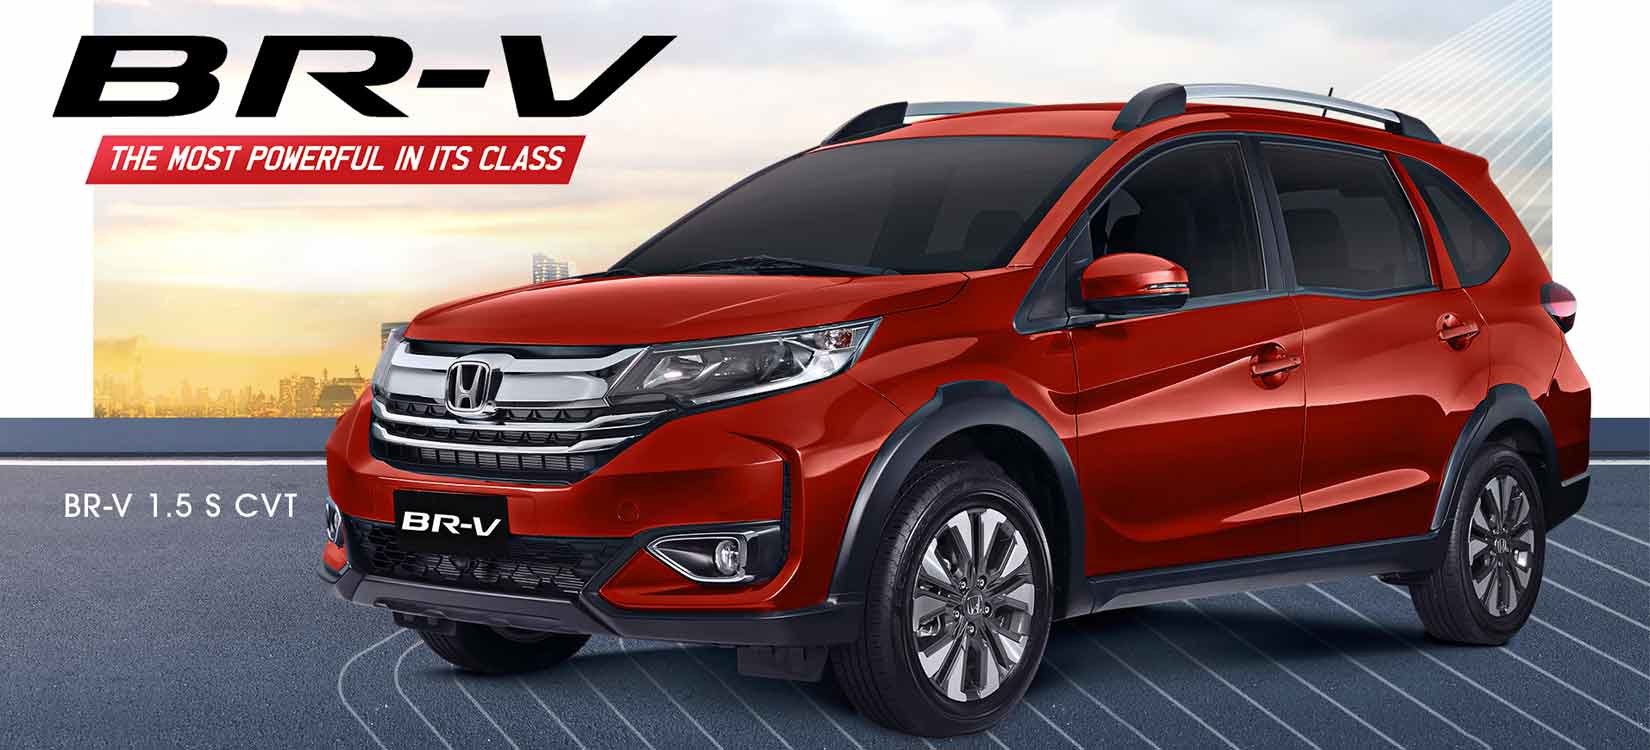 7 Reasons why the Honda BR-V is the perfect companion for your road trips